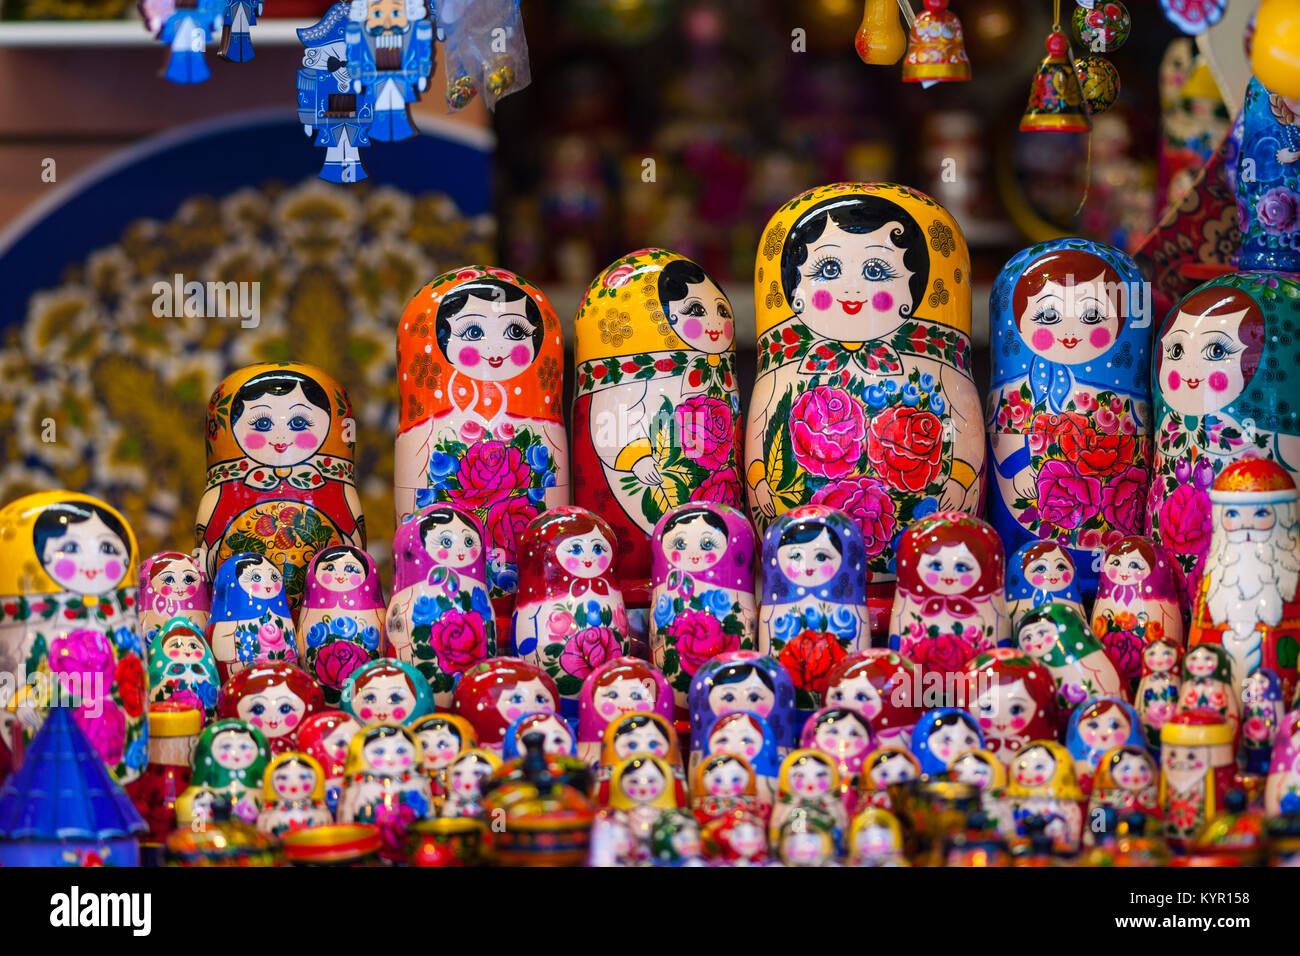 Several rows of colorful traditional Russian wooden toys matreshka on display for sale Stock Photo